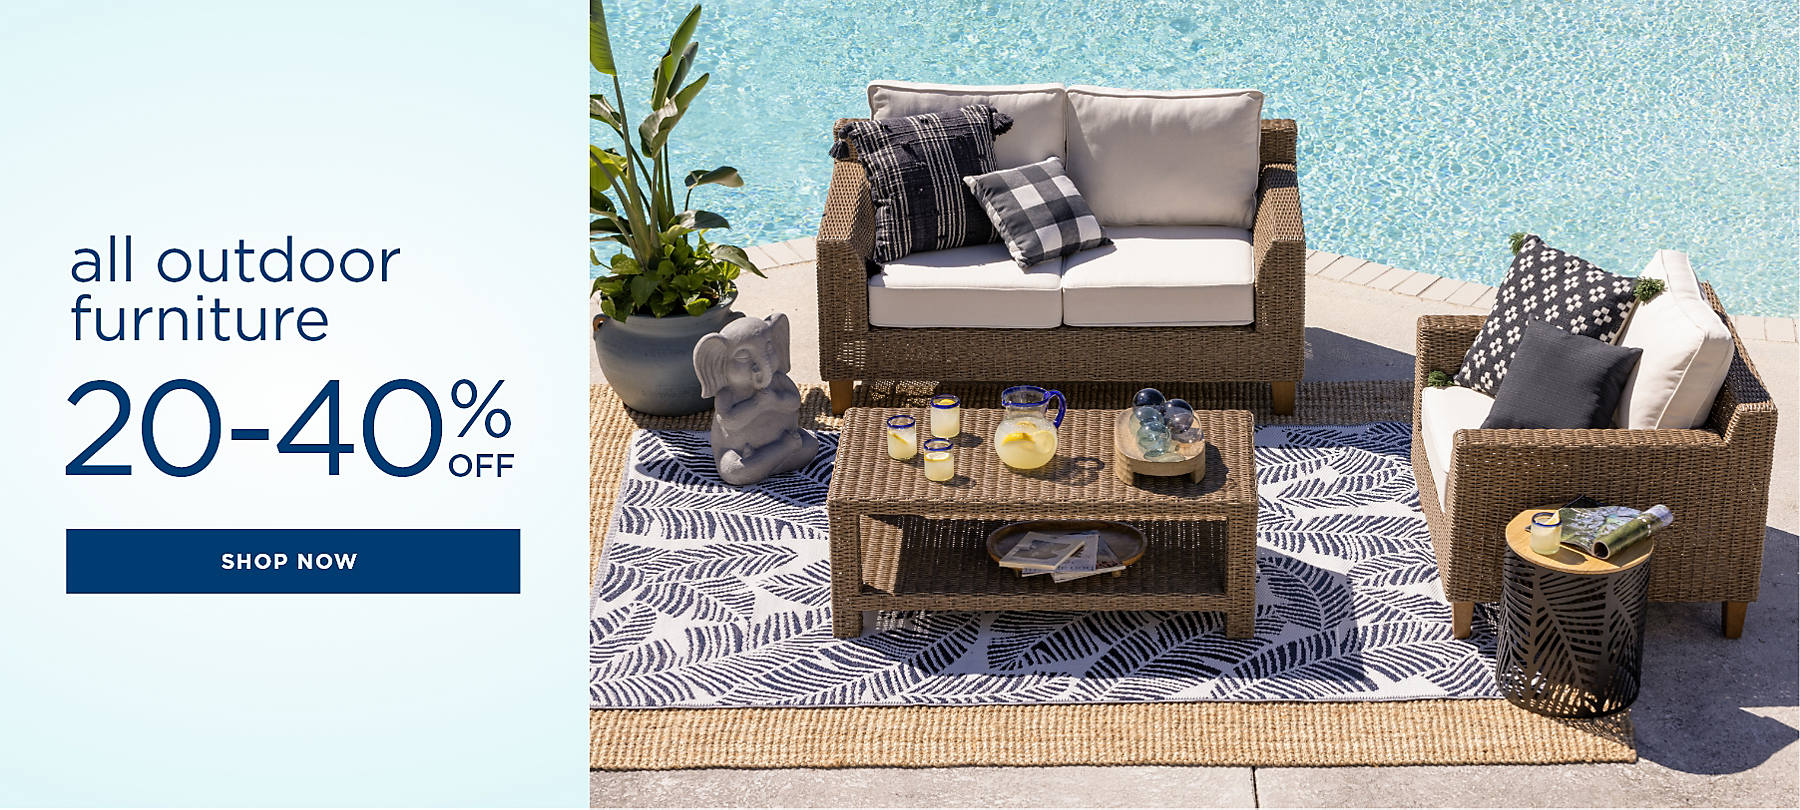 all outdoor furniture 20-40% off shop now